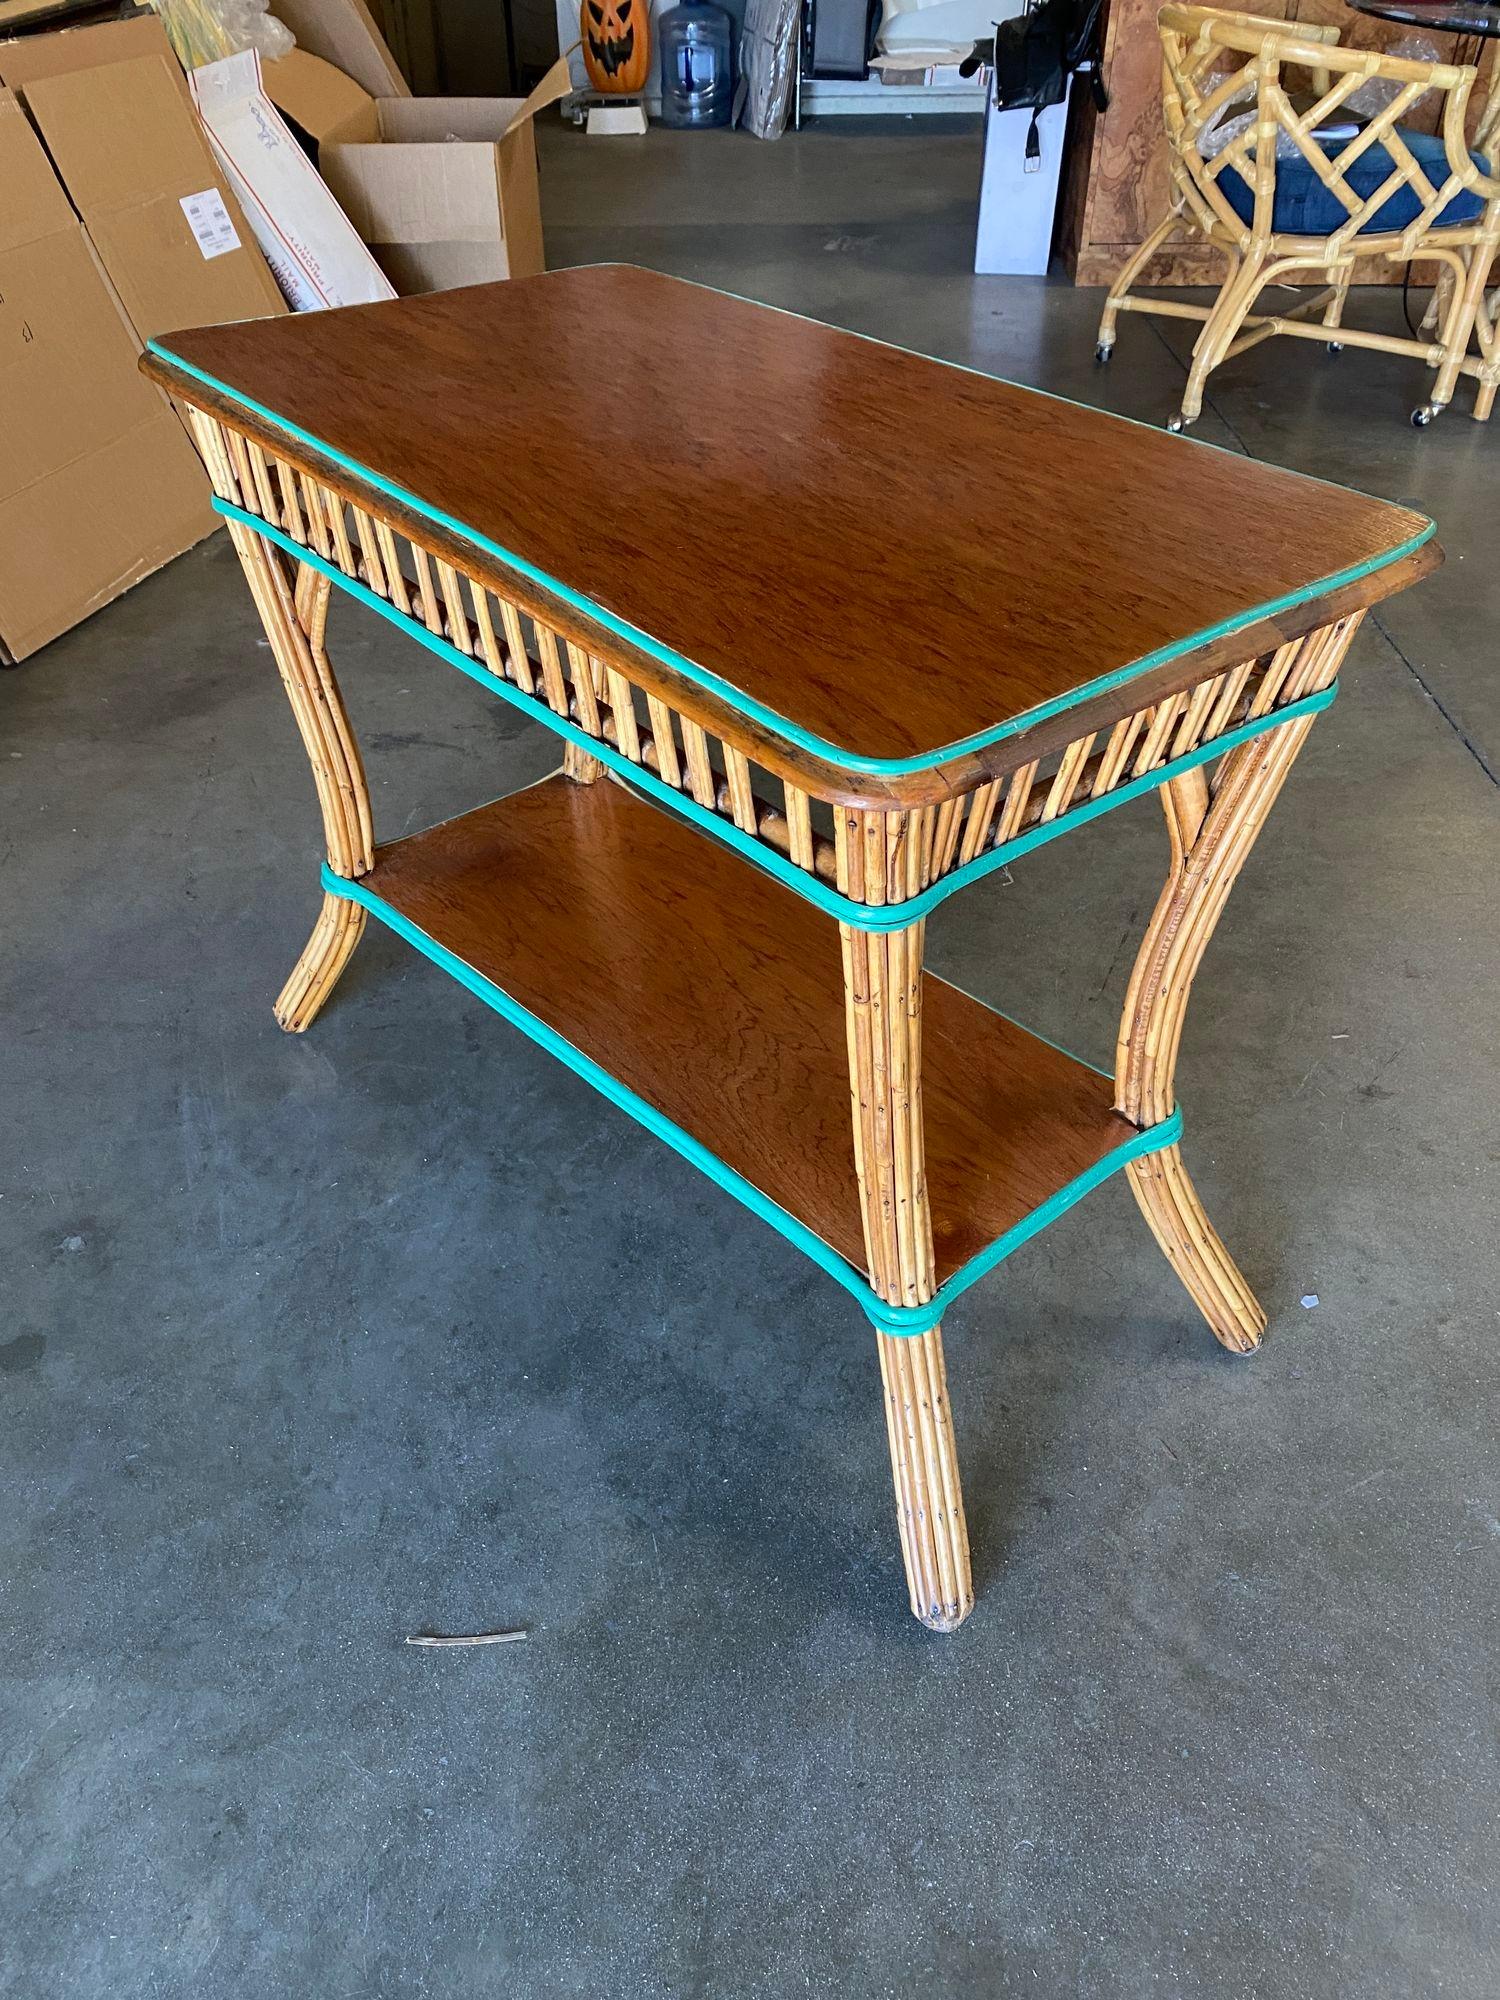 Circa 1940 6-tier rattan shelf/console table with mahogany shelving and tabletop. This small shelf doubles as a shelf and a console table, perfect for use as a focal point in a living room, lobby or hallway.
 
Could also be used as a TV stand with